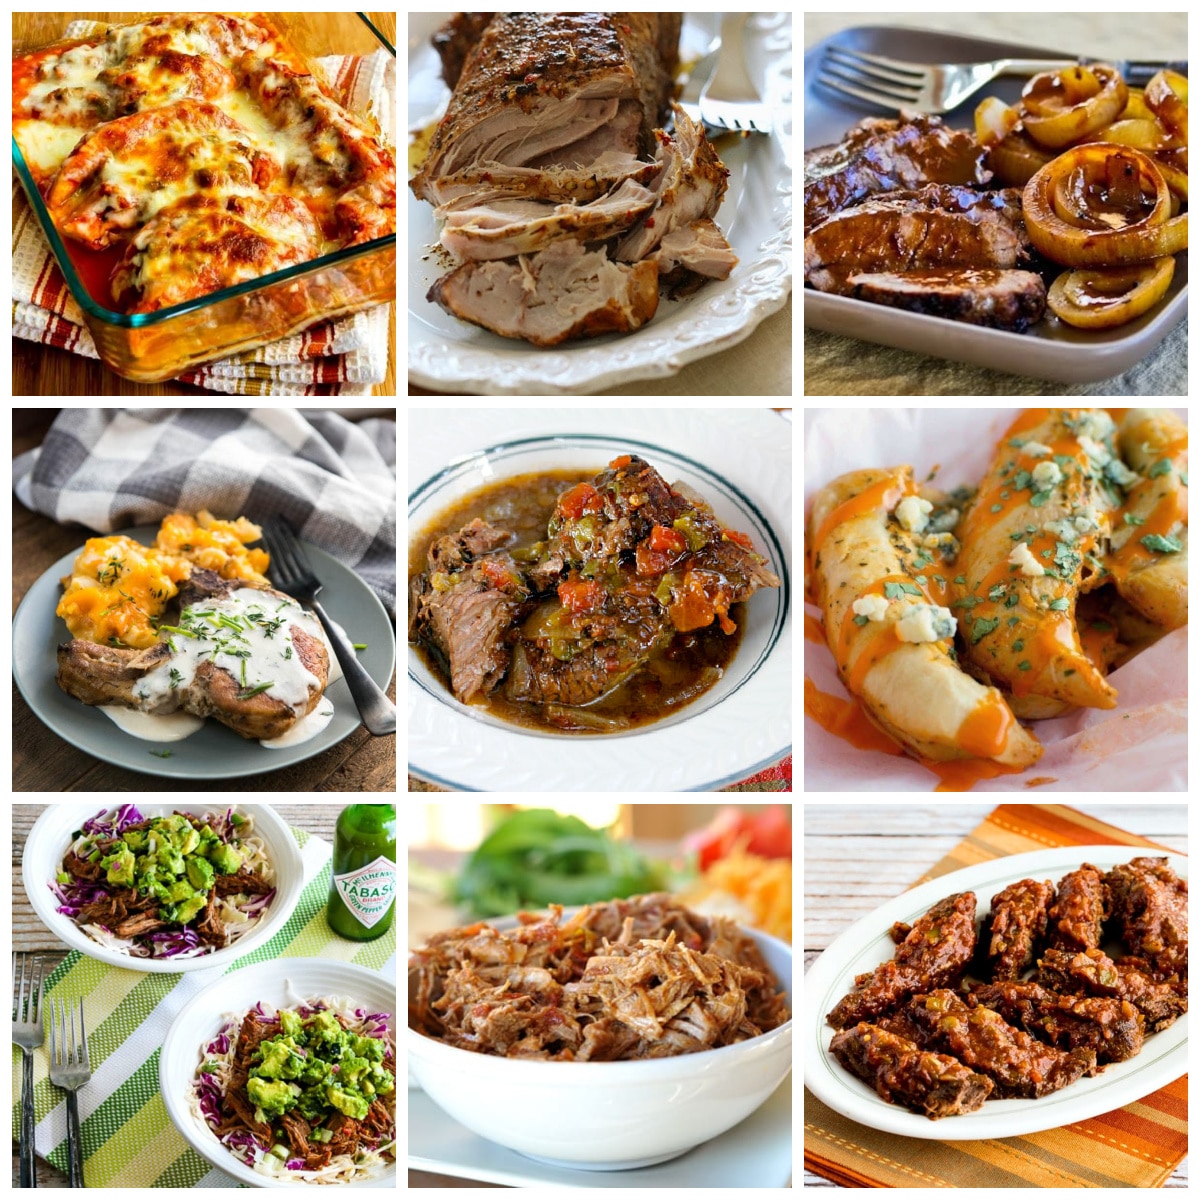 25 Low-Carb and Keto Slow Cooker Dinners collage of featured recipes